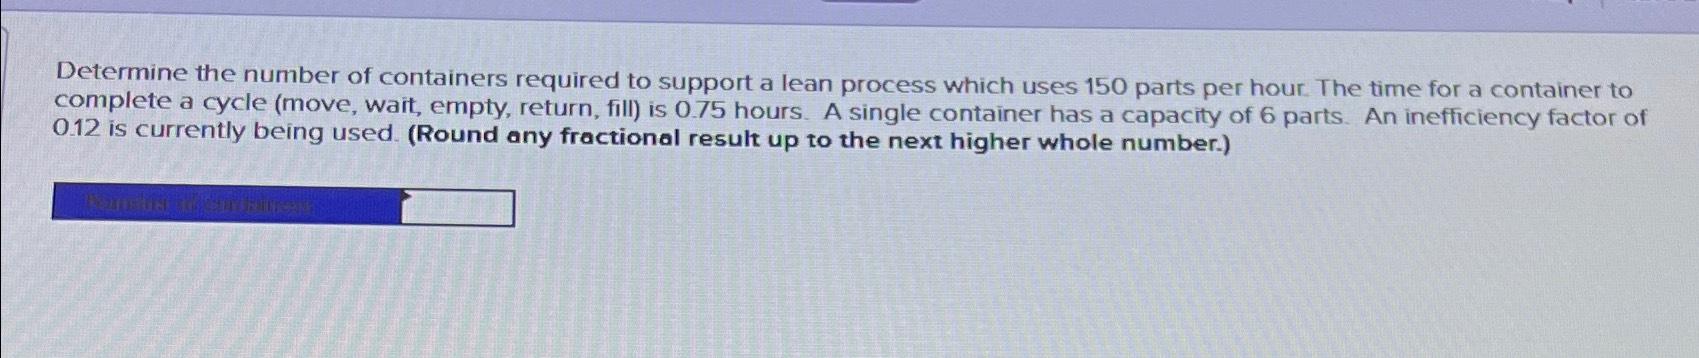 Determine the number of containers required to support a lean process which uses 150 parts per hour. The time